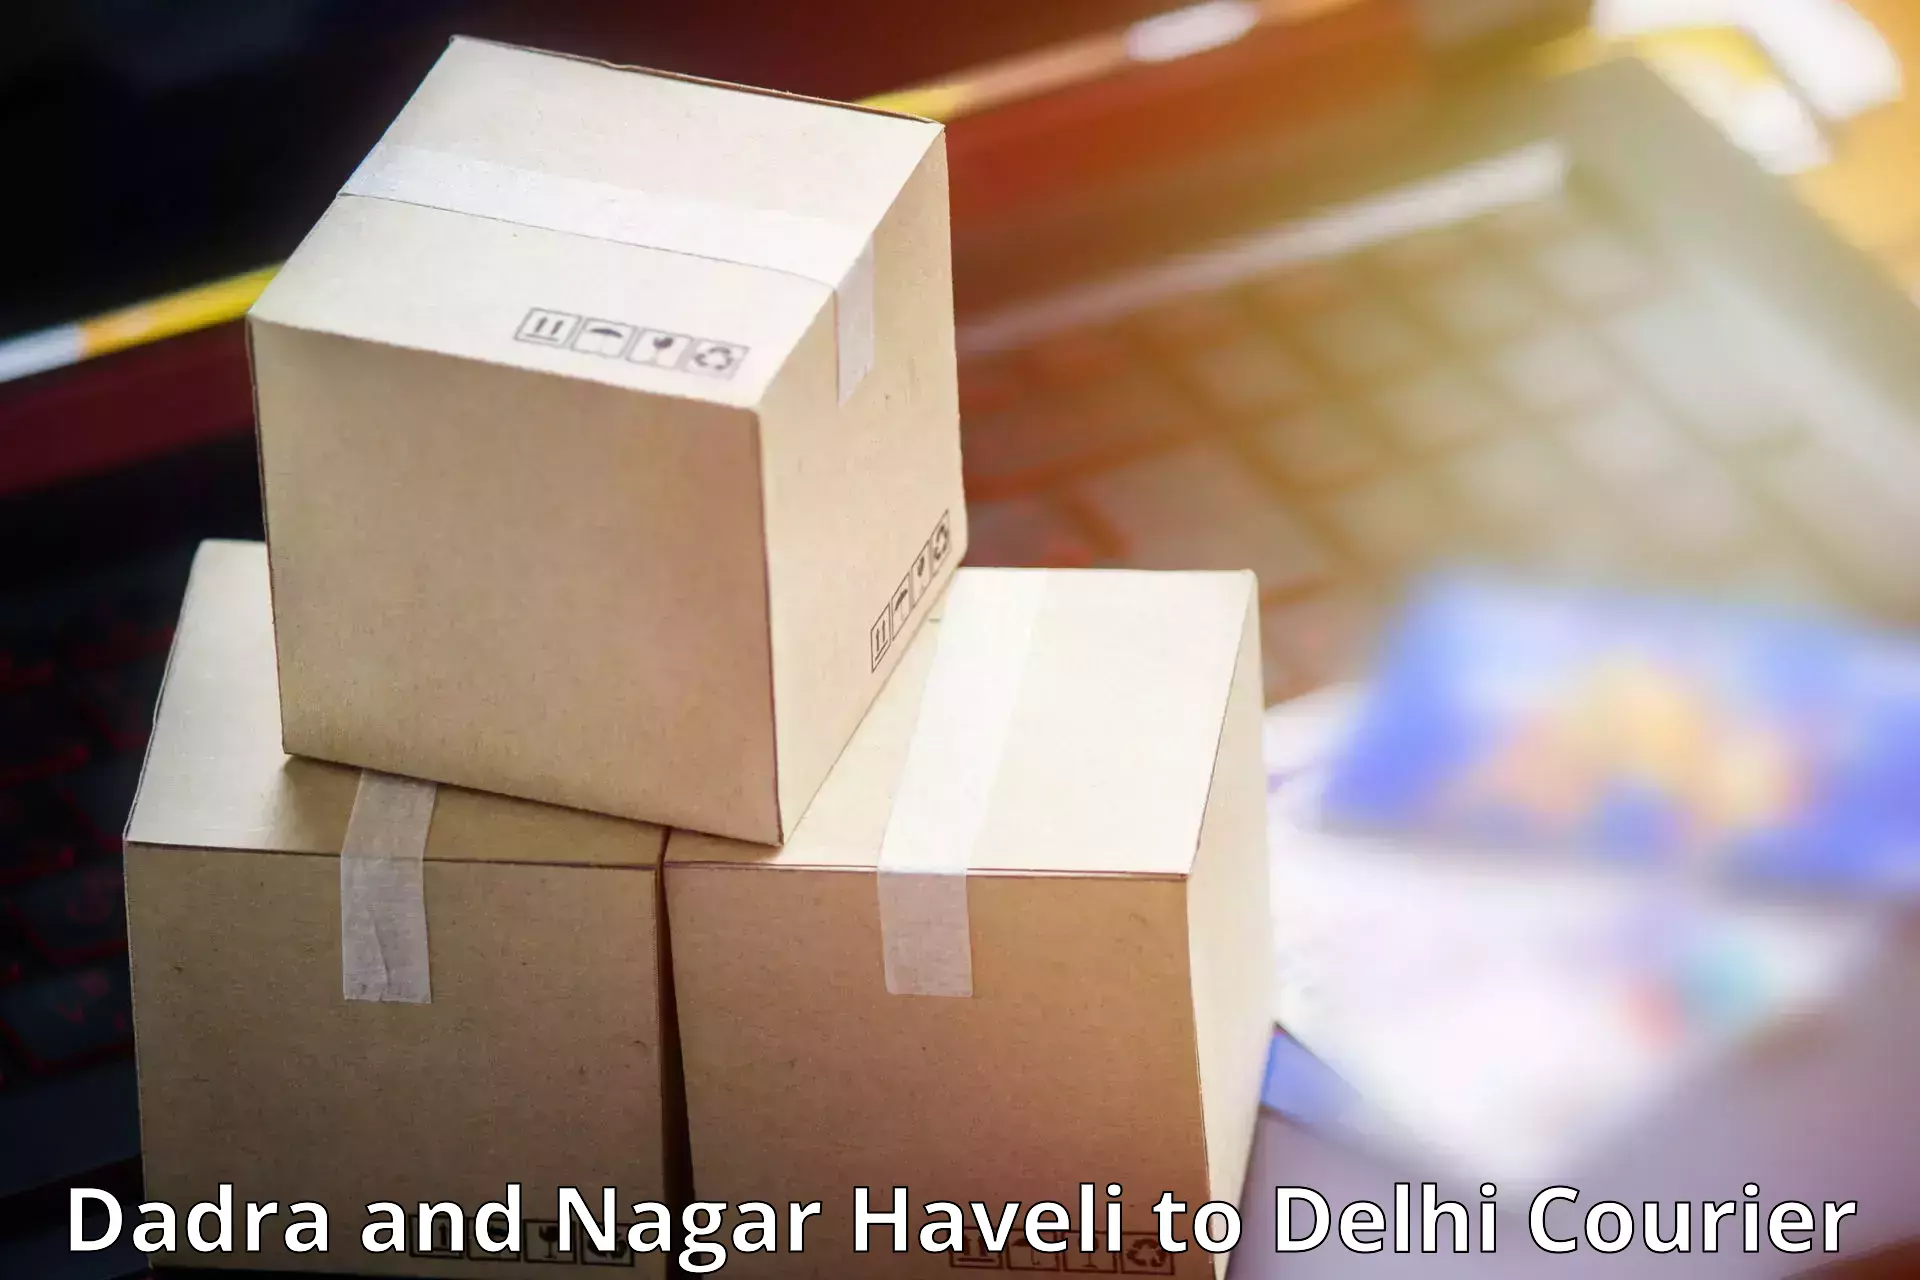 Sustainable delivery practices Dadra and Nagar Haveli to East Delhi